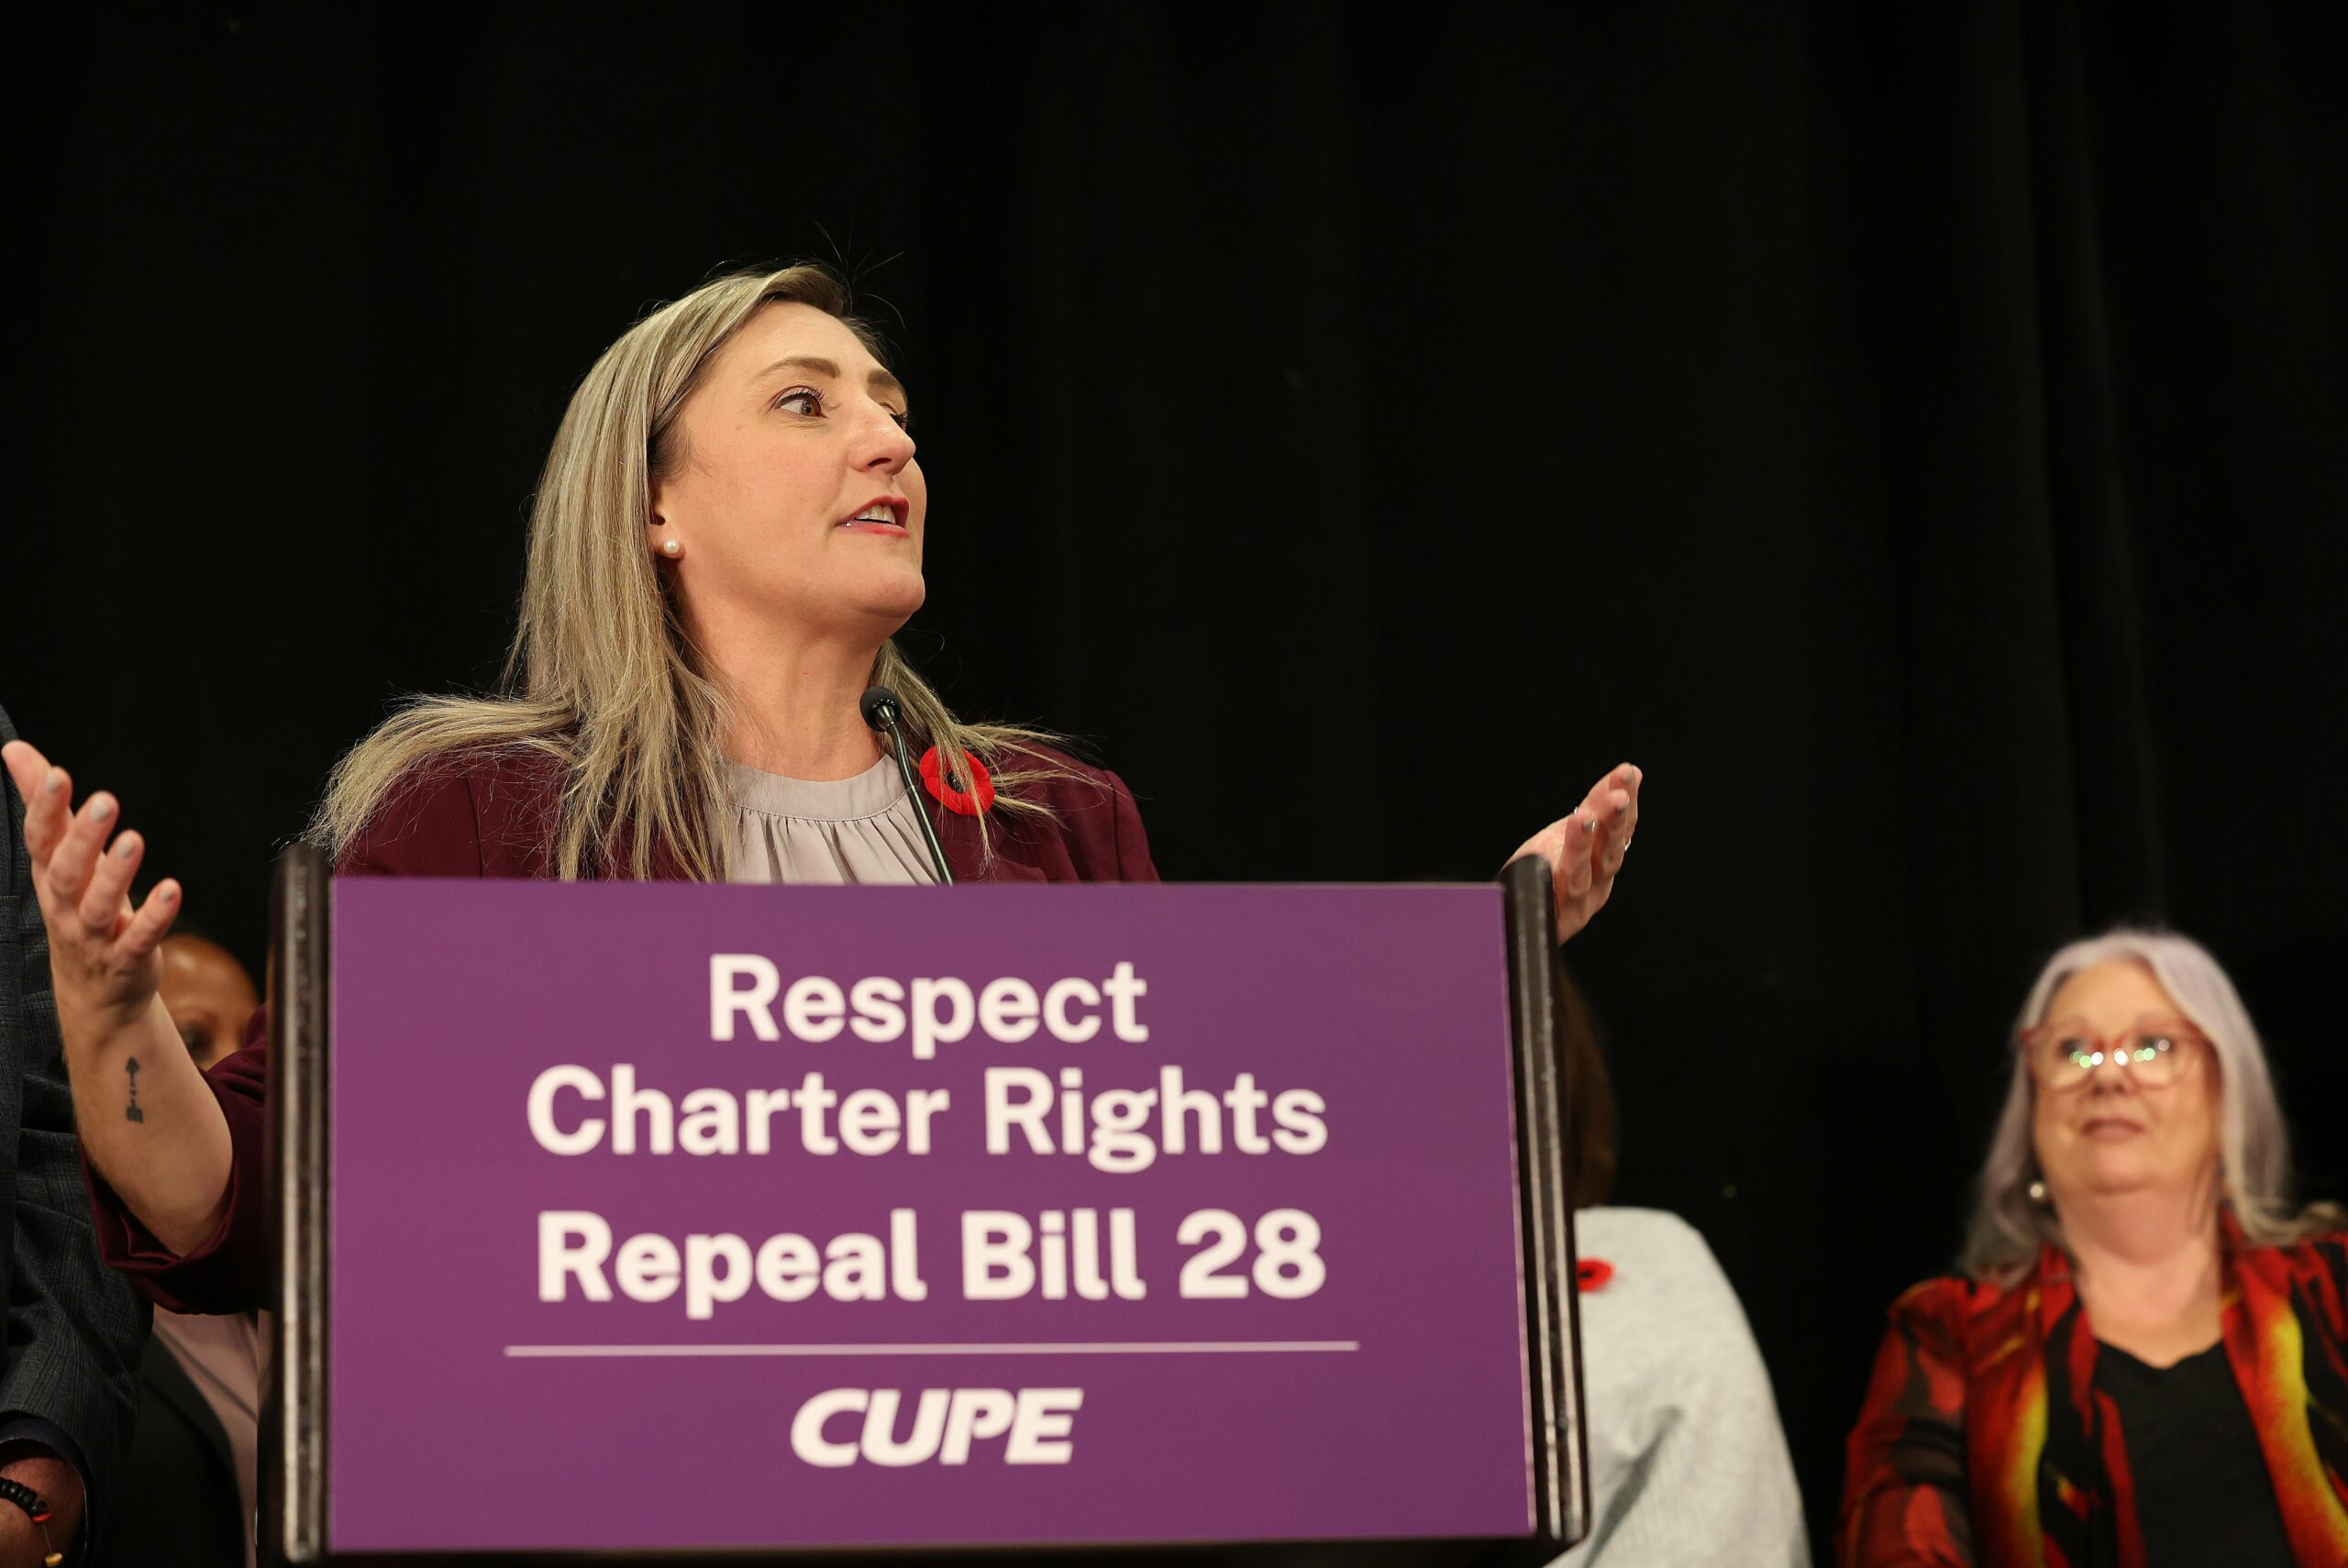 CUPE education workers union gives notice of another strike